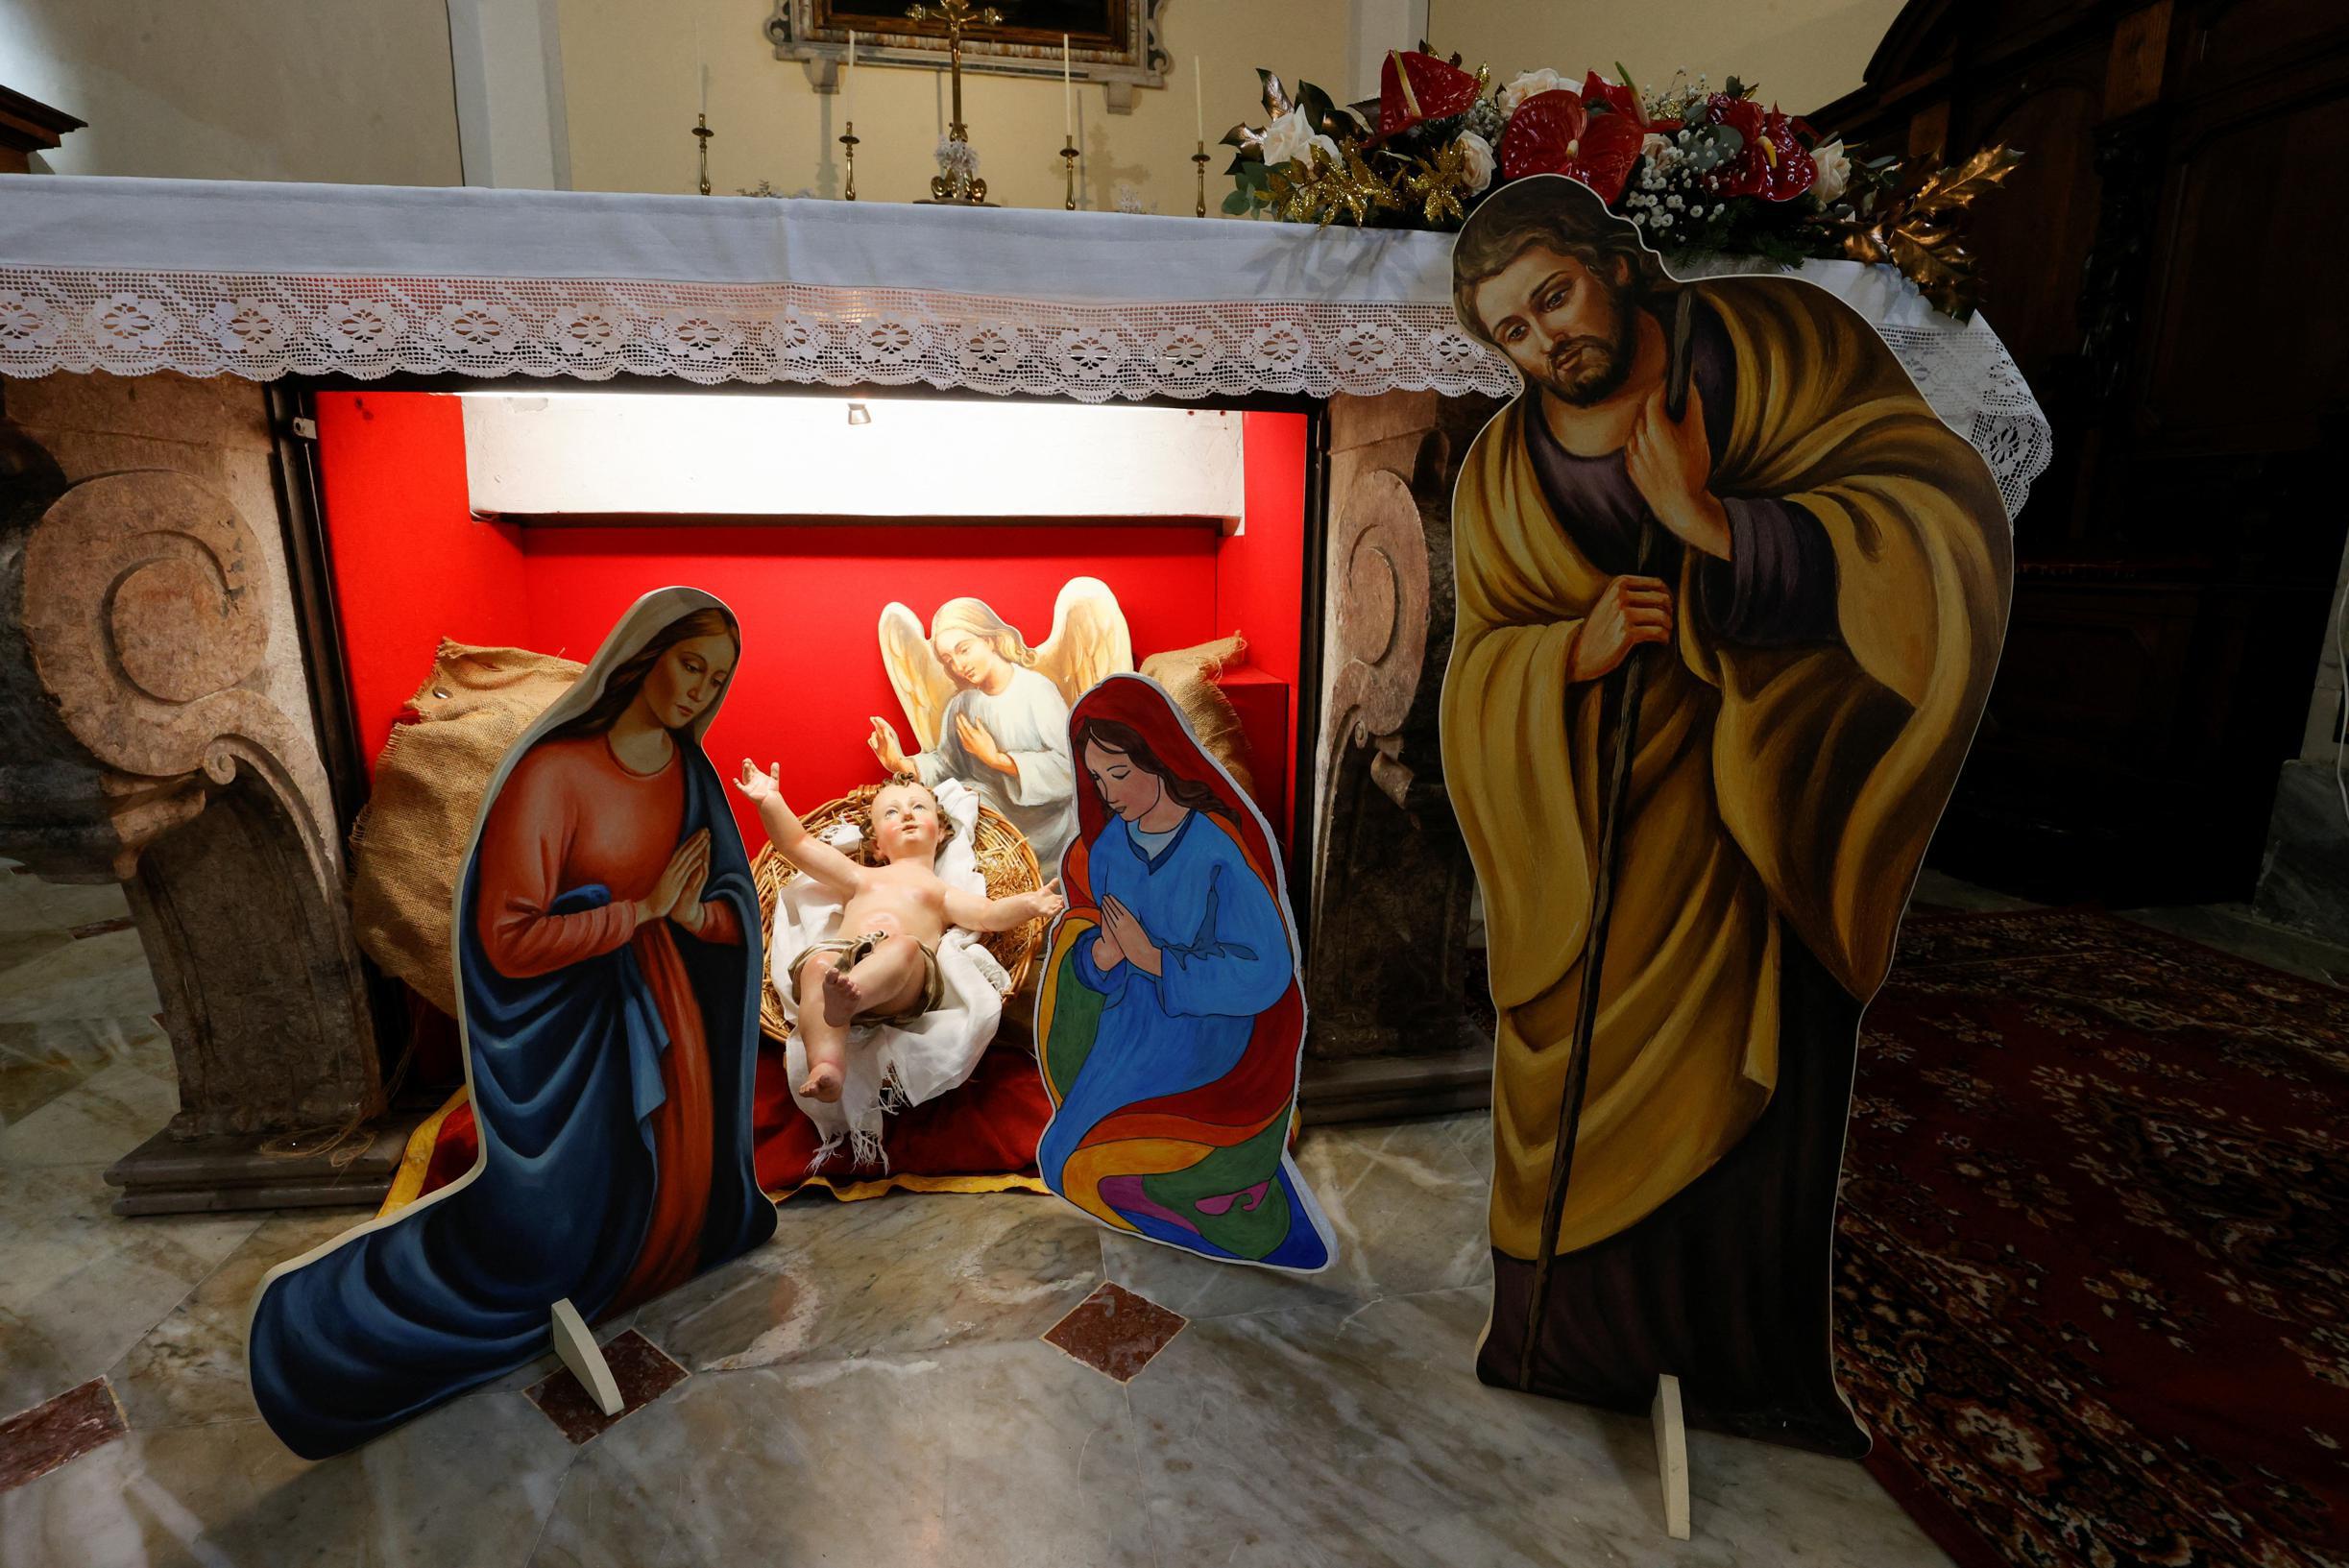 Controversy in Italy as Nativity scene features Jesus with two mothers: “Highlighting non-traditional family structures”